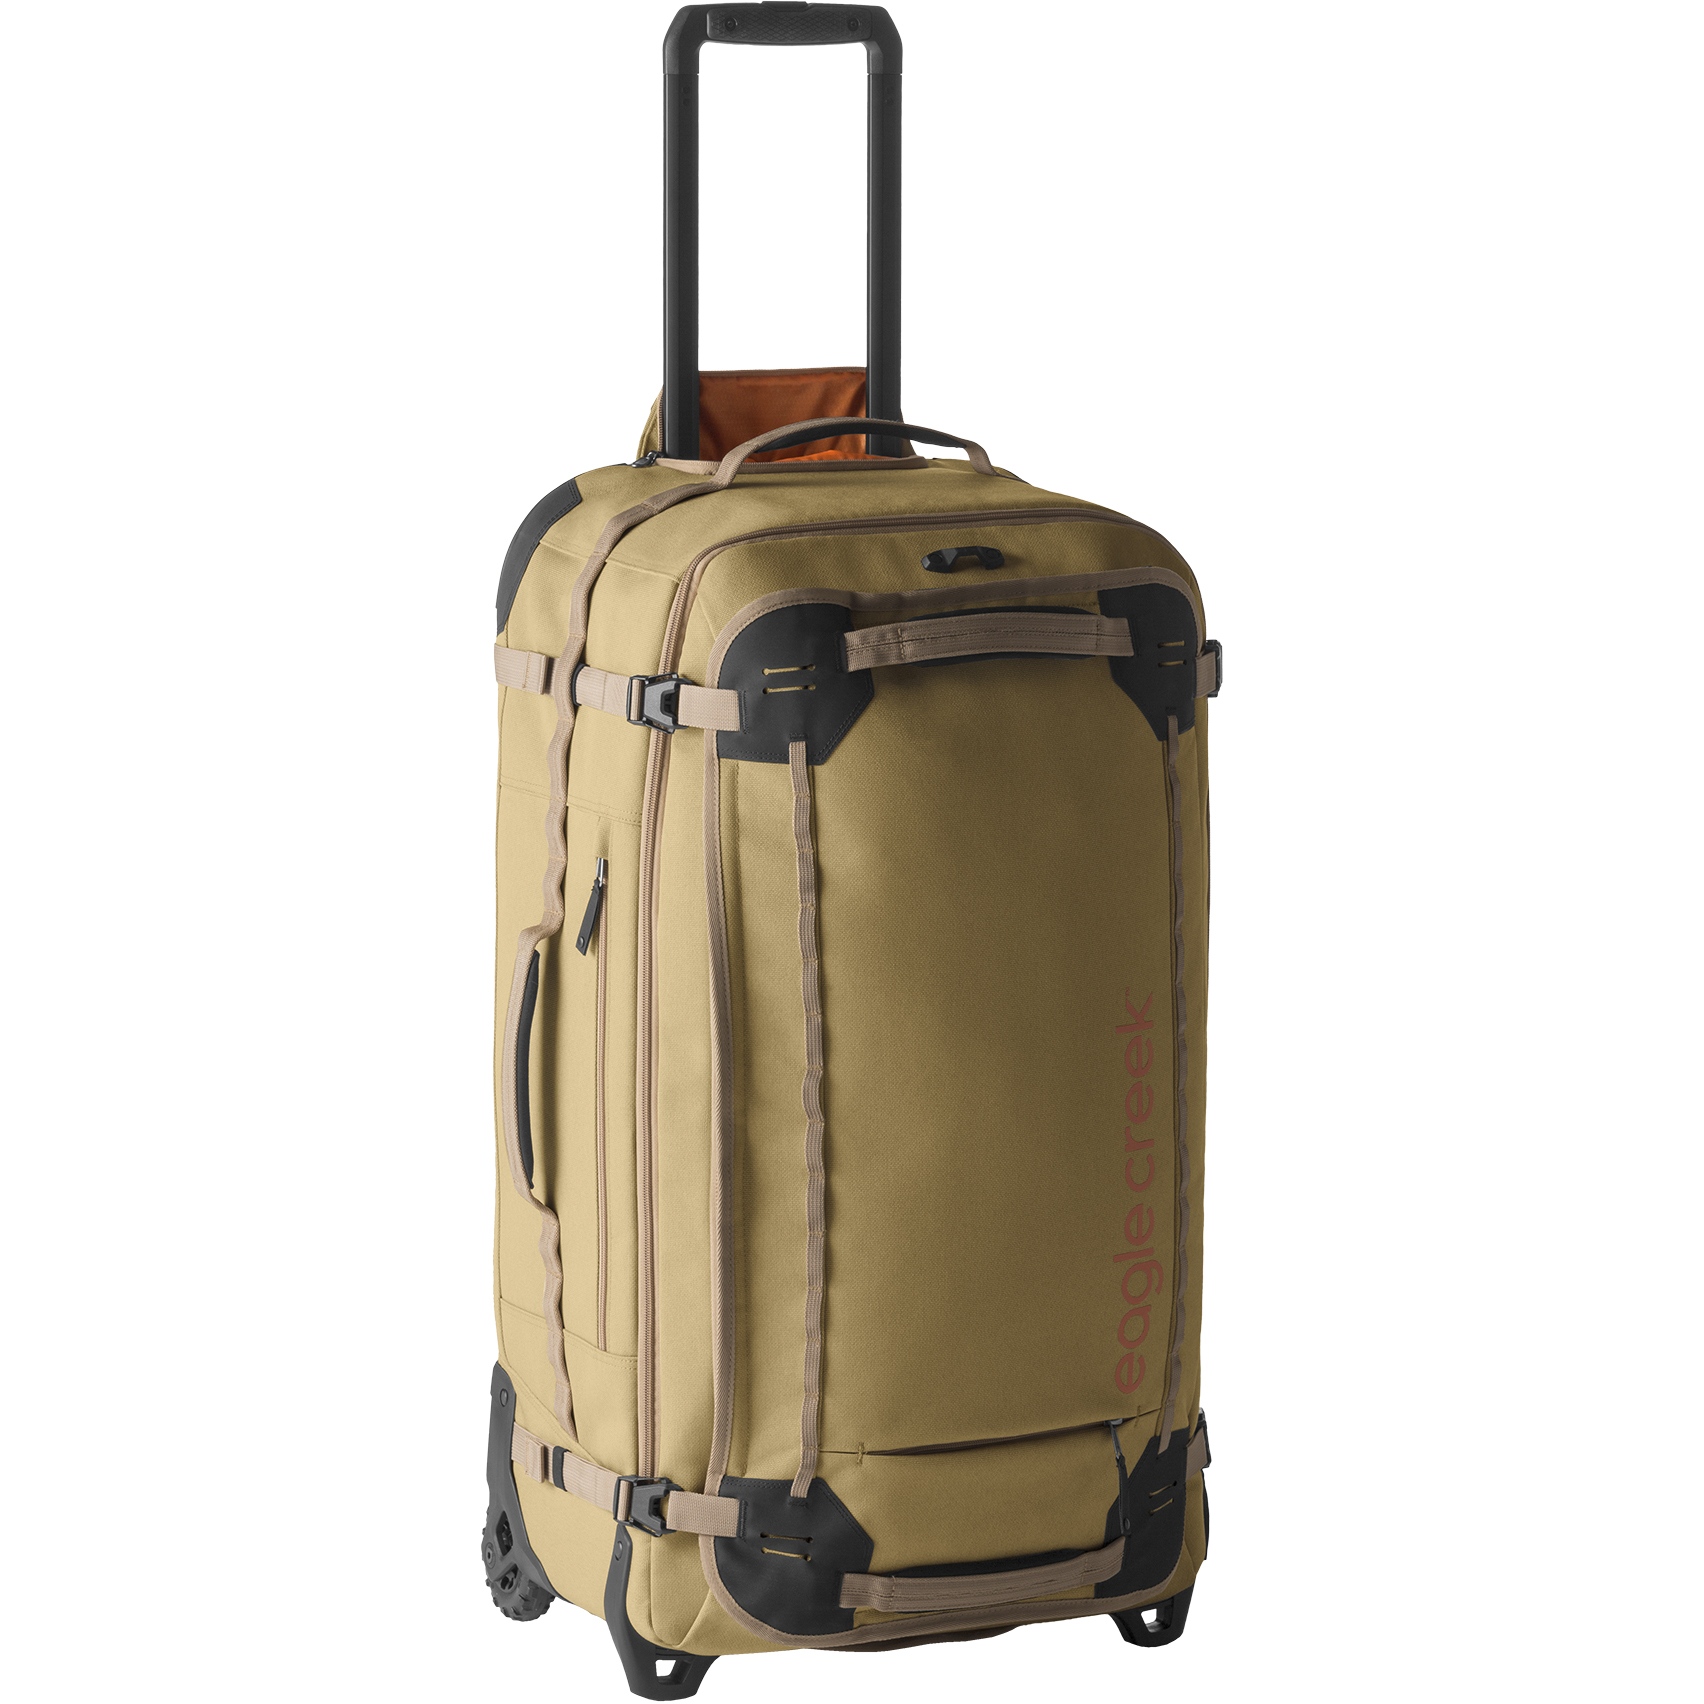 Picture of Eagle Creek Gear Warrior XE Trolley Case - 91L - sand dune